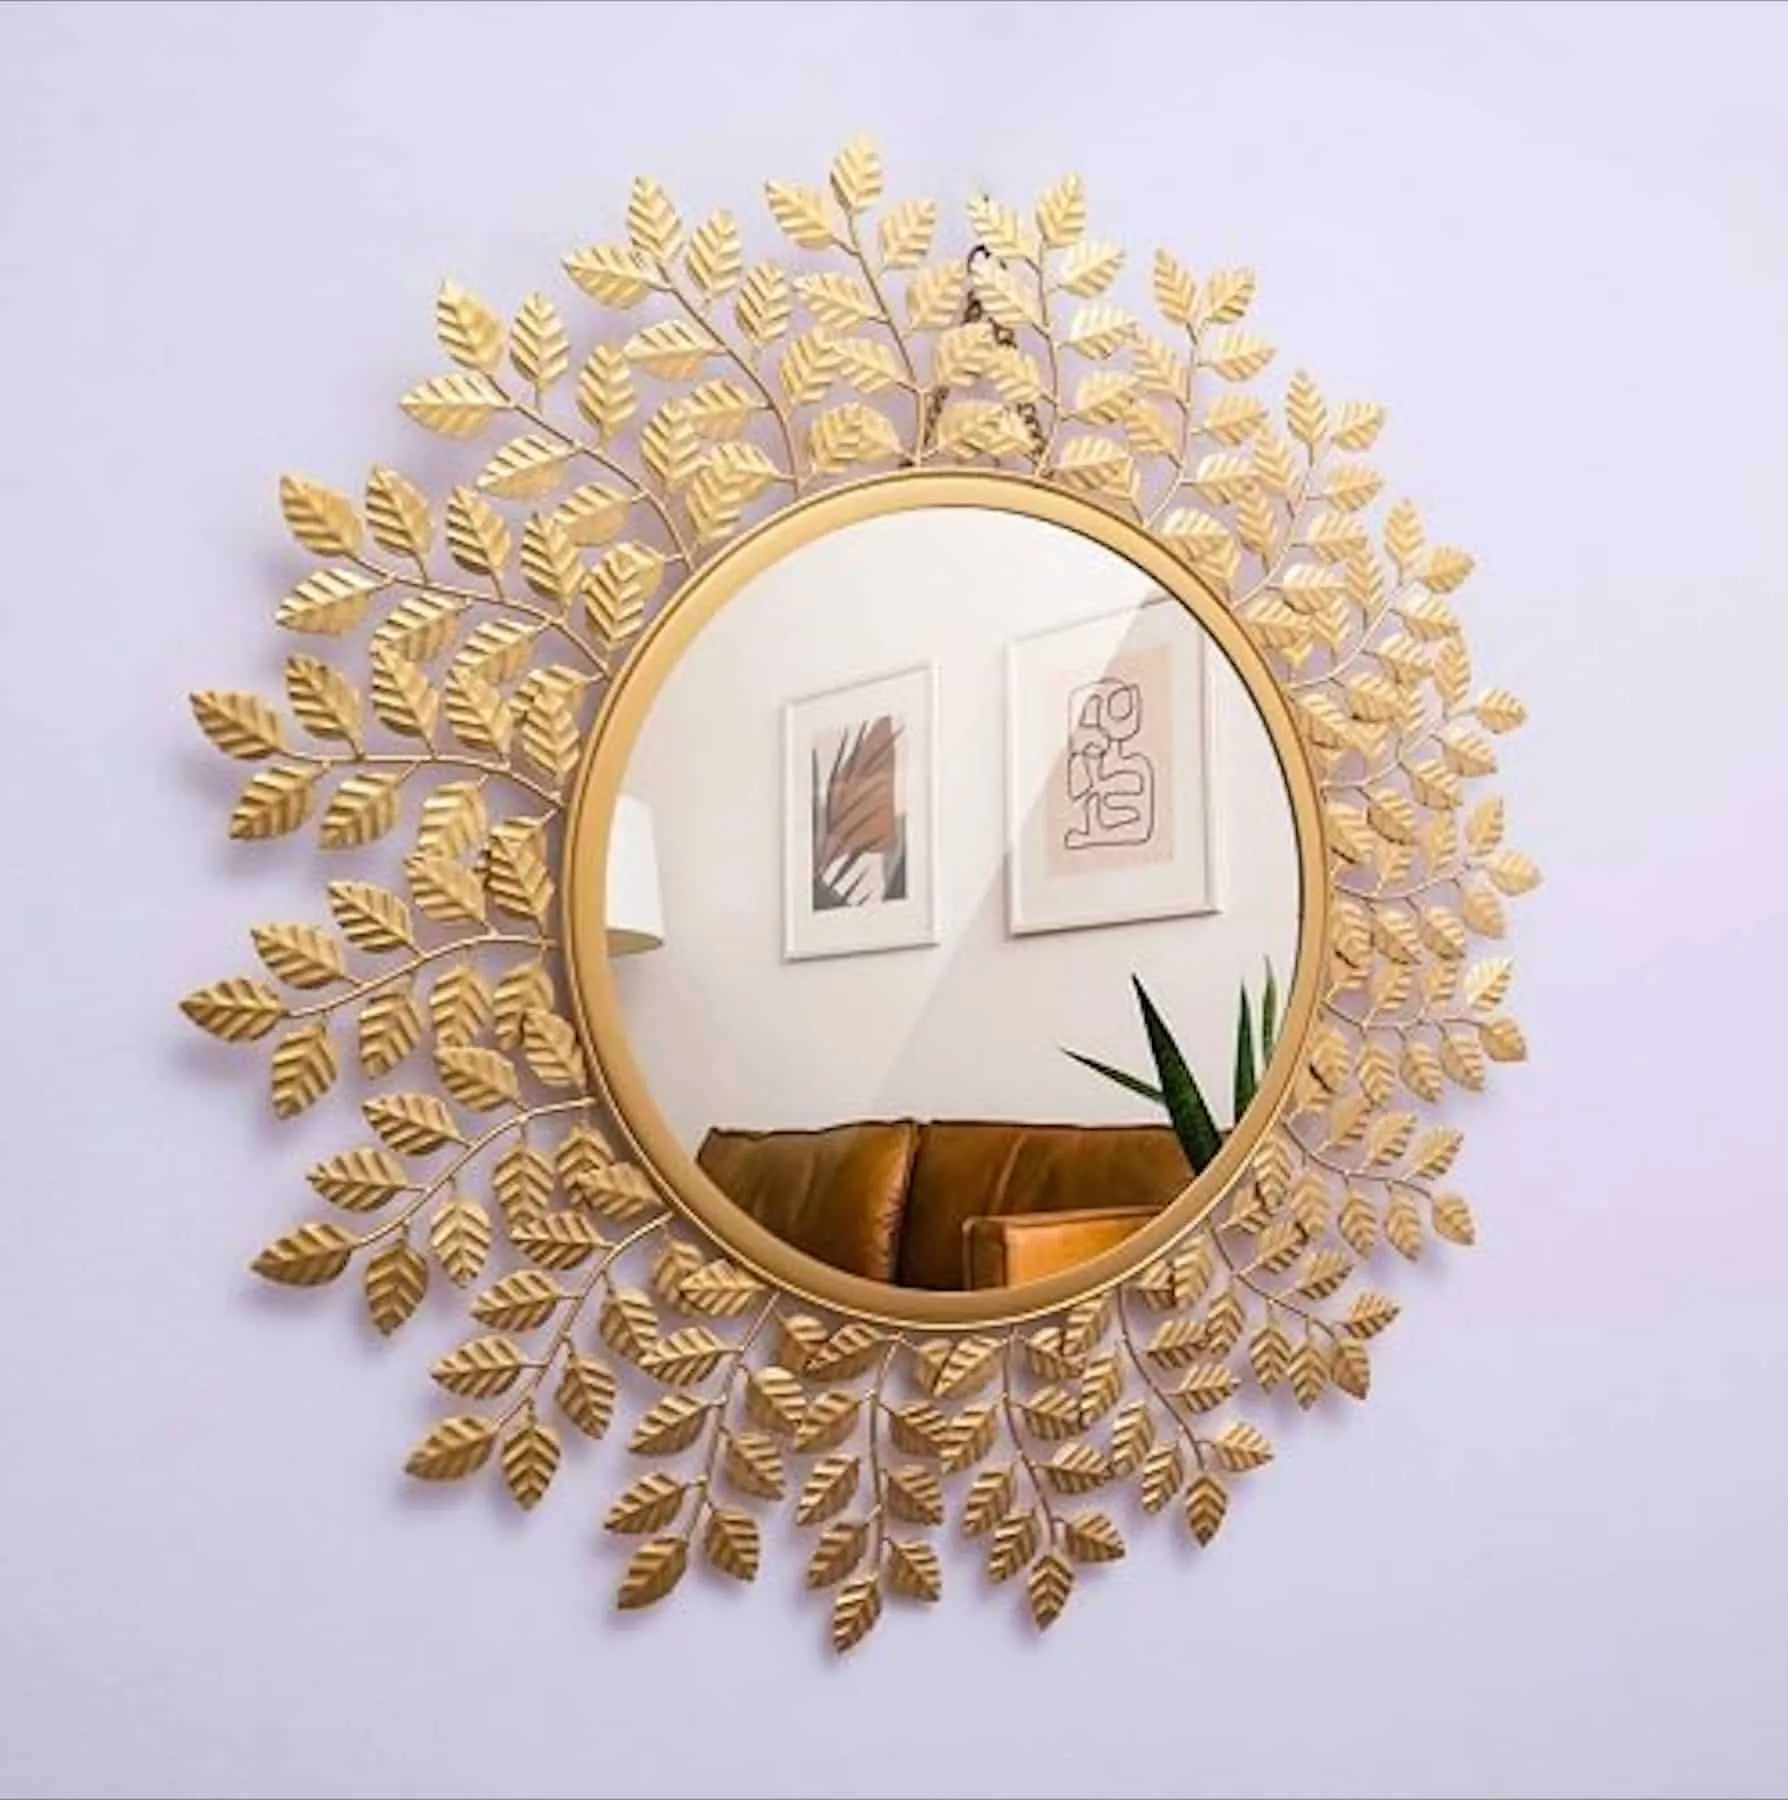 Wall round mirror hanging decor with golden leaves frame